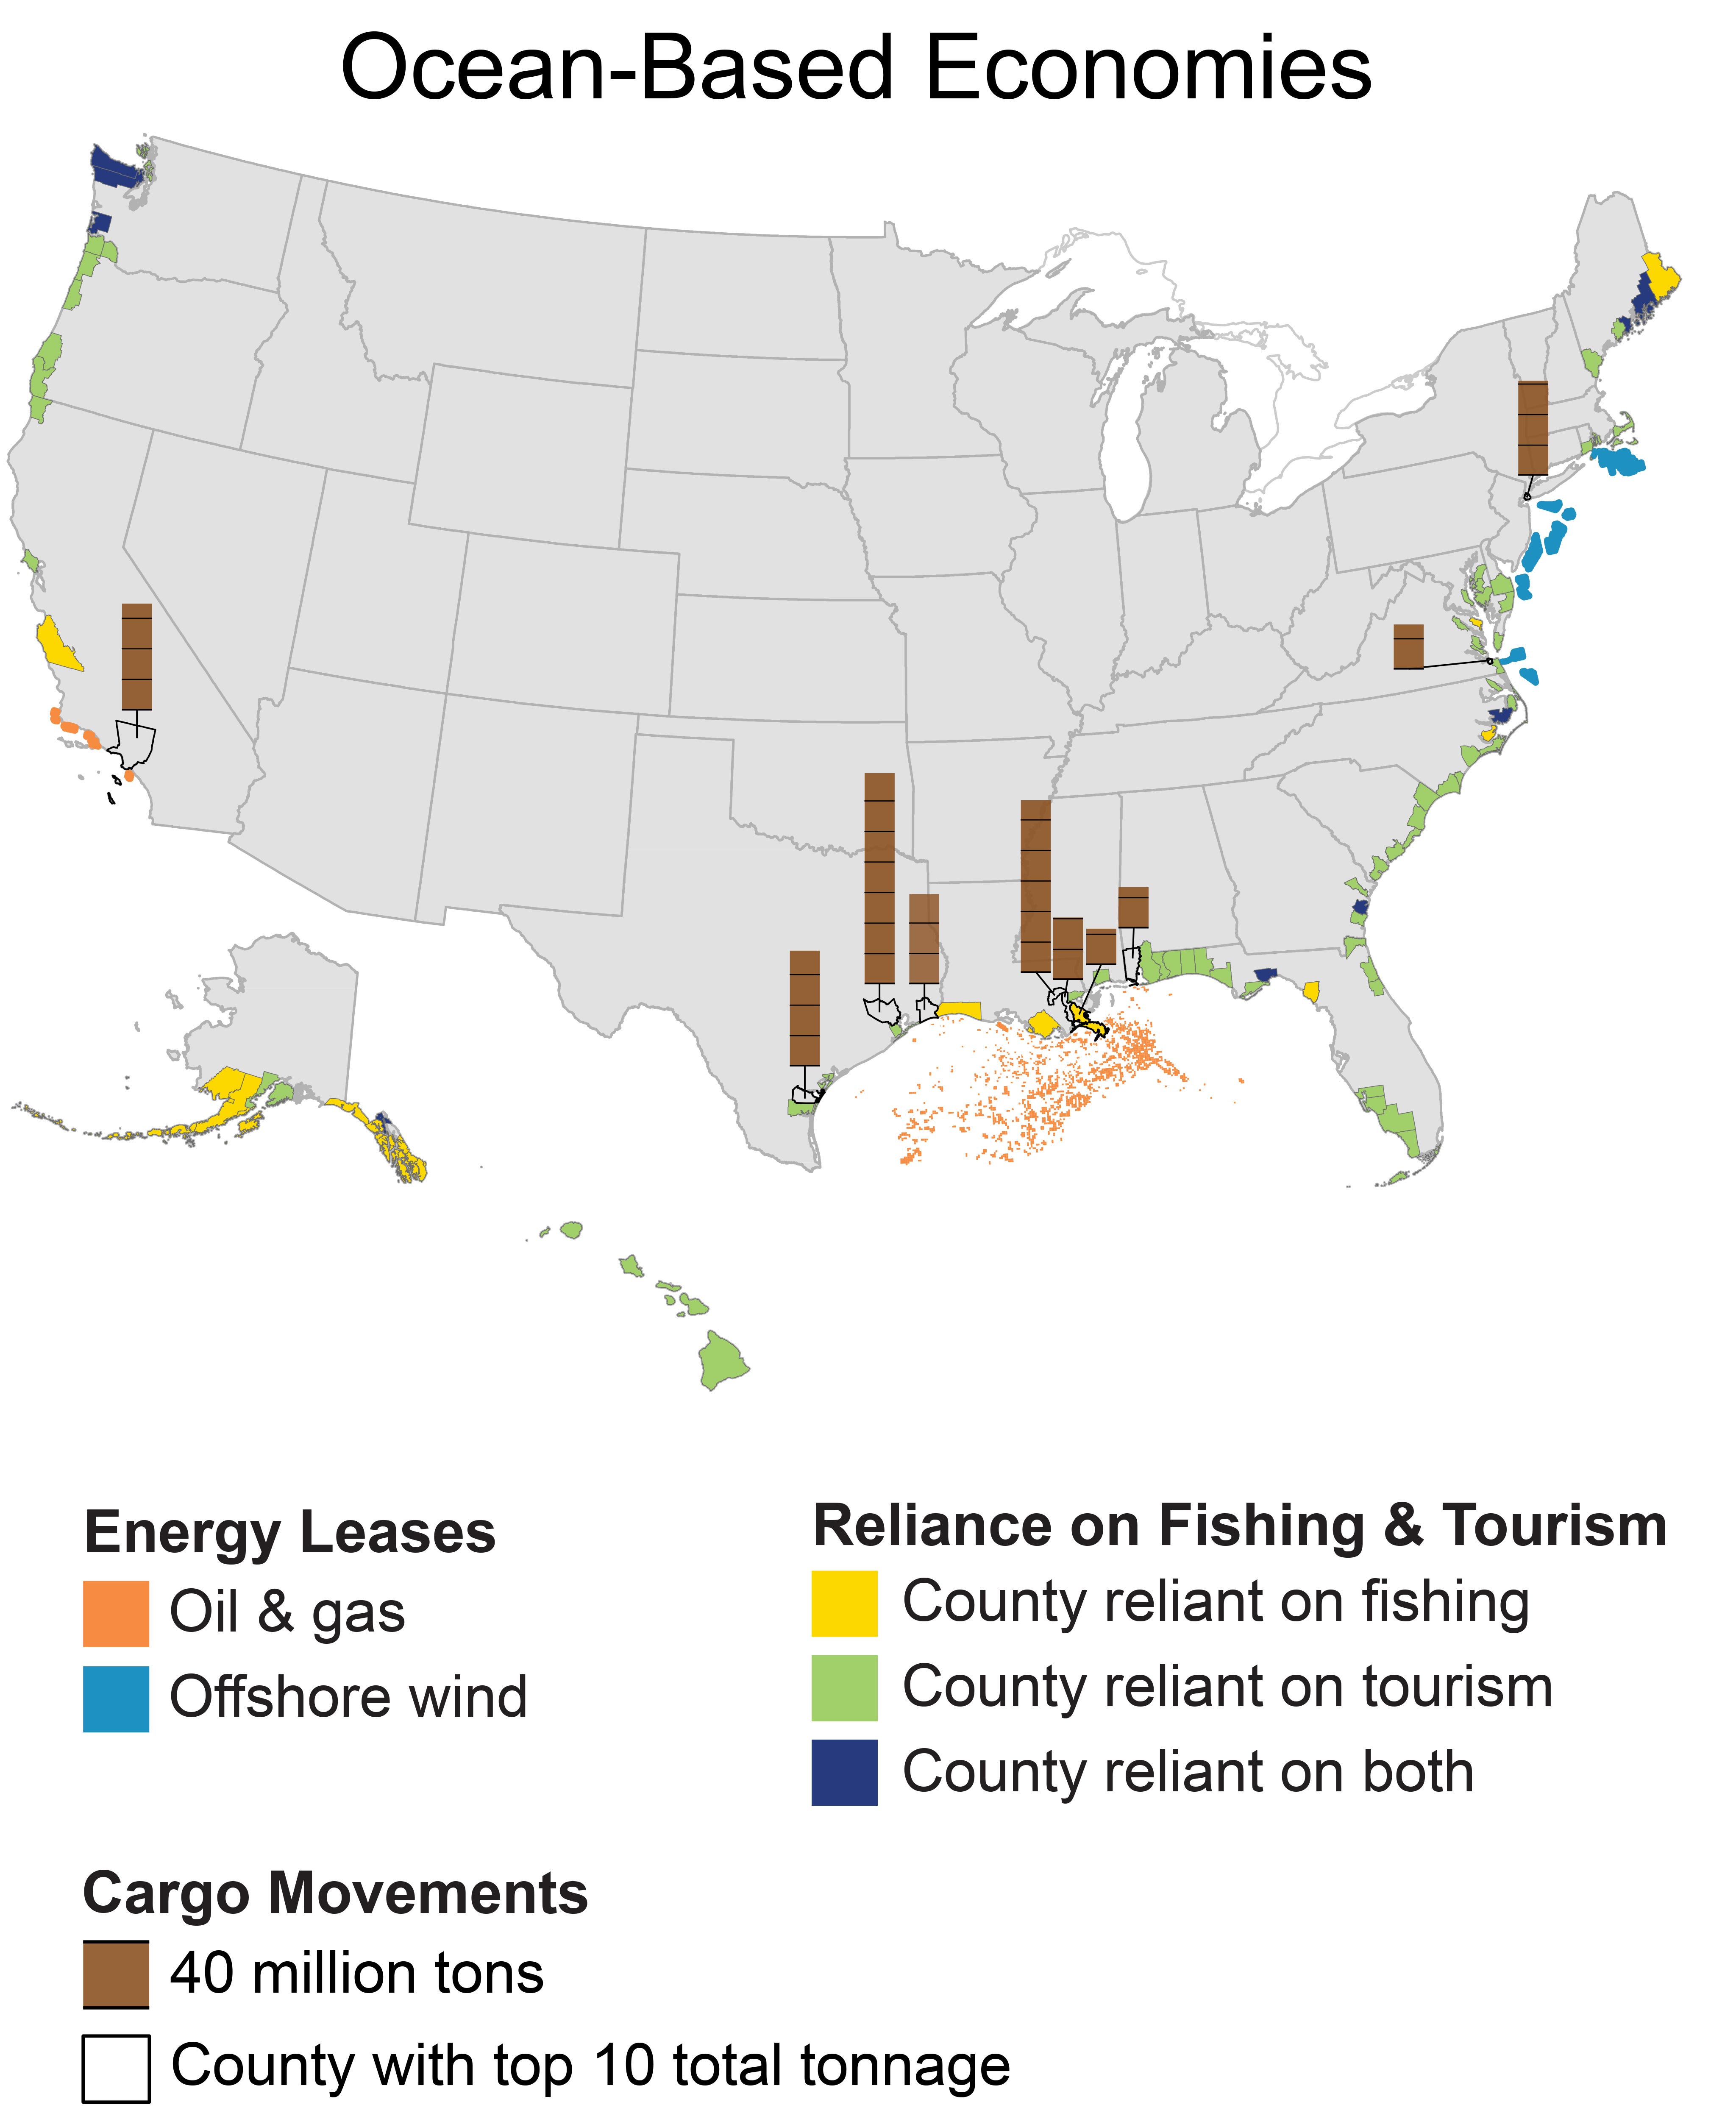 A map of the US showing industries that make up the ocean-based economy